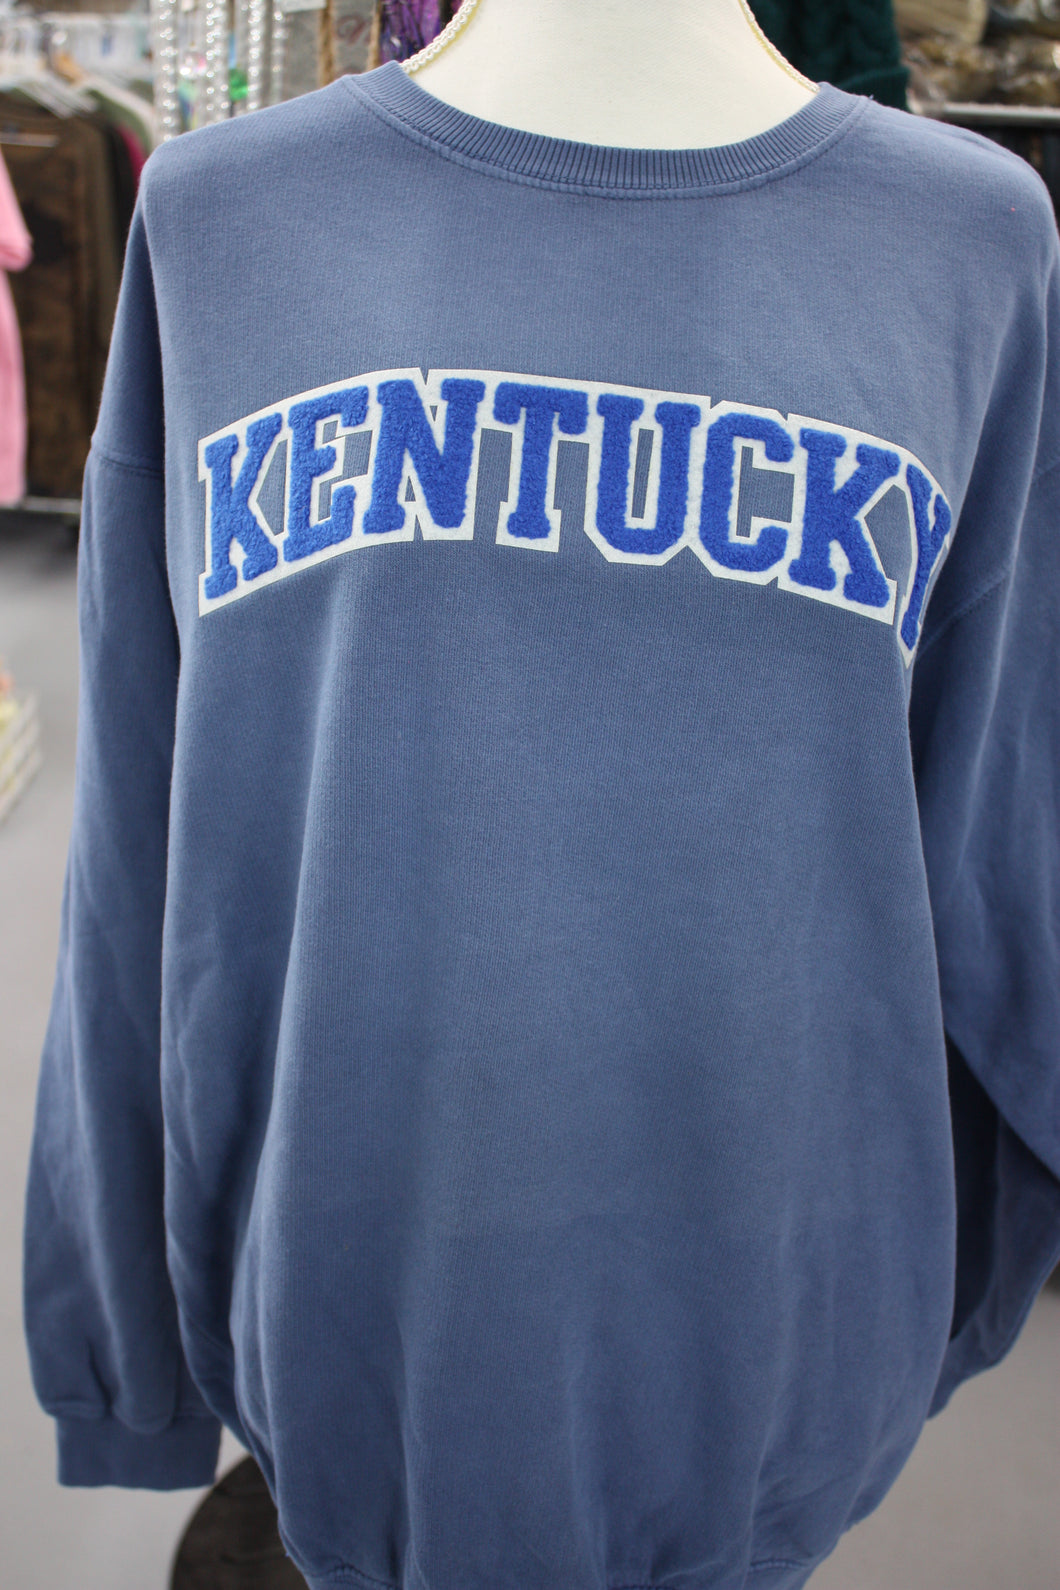 KENTUCKY INSPIRED T-SHIRTS AND GIFTS KY Chenille / Blue Distressed blue sweatshirt